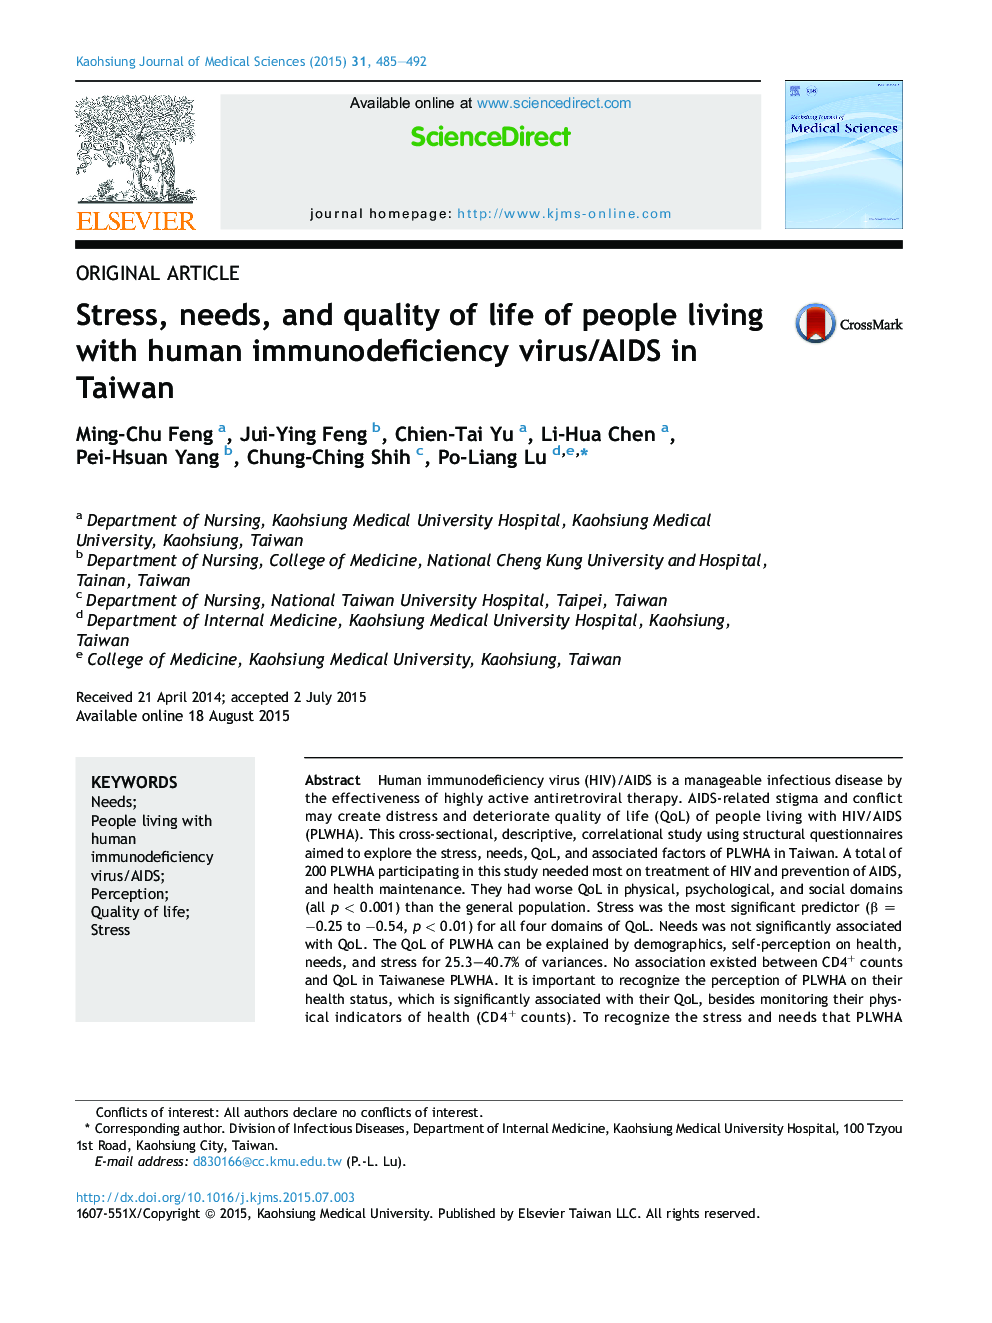 Stress, needs, and quality of life of people living with human immunodeficiency virus/AIDS in Taiwan 